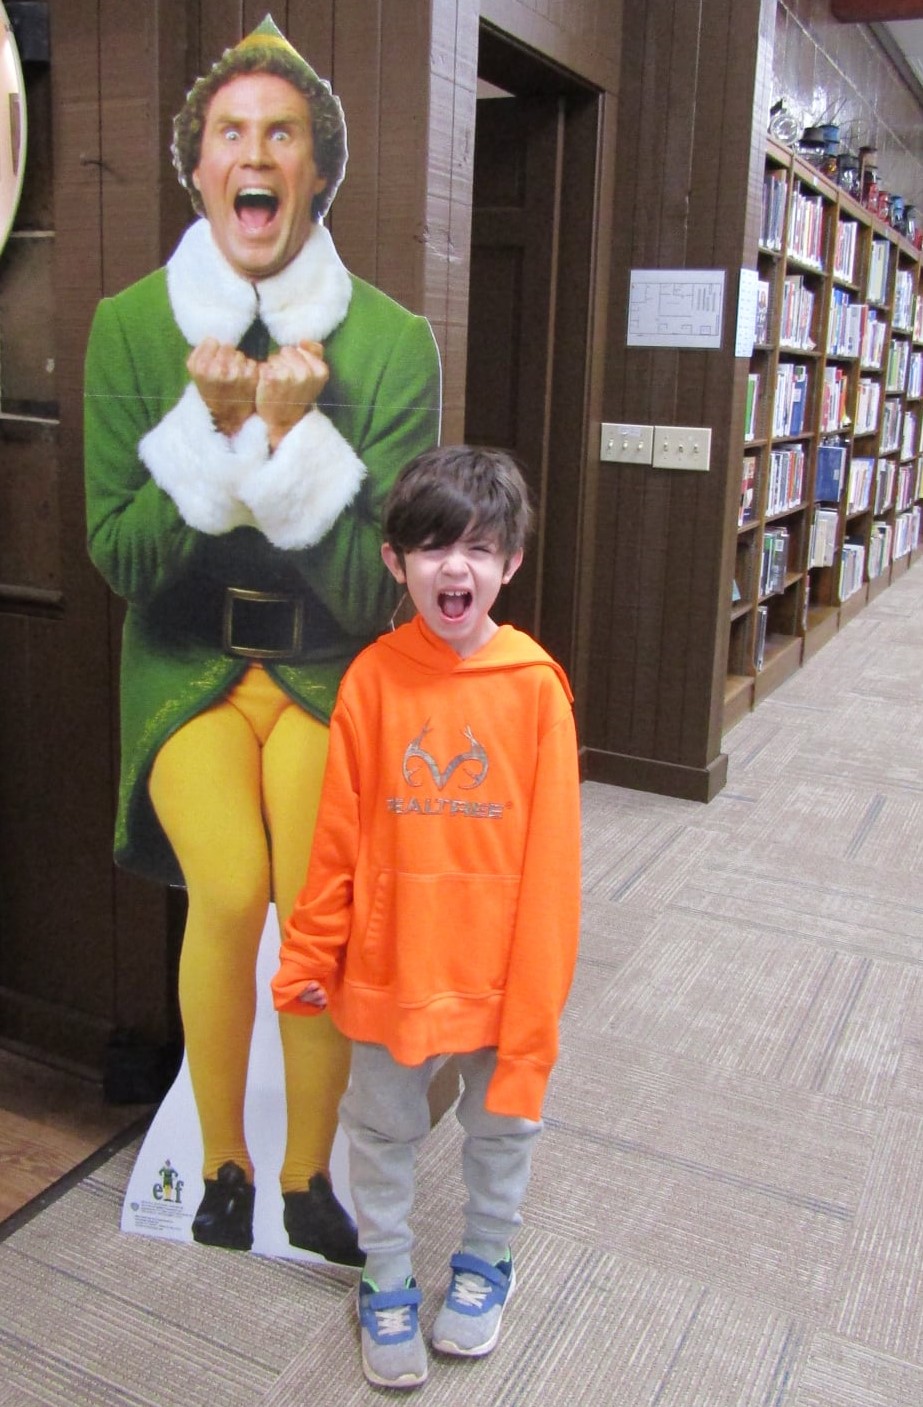 photo of Buddy the Elf and young boy.